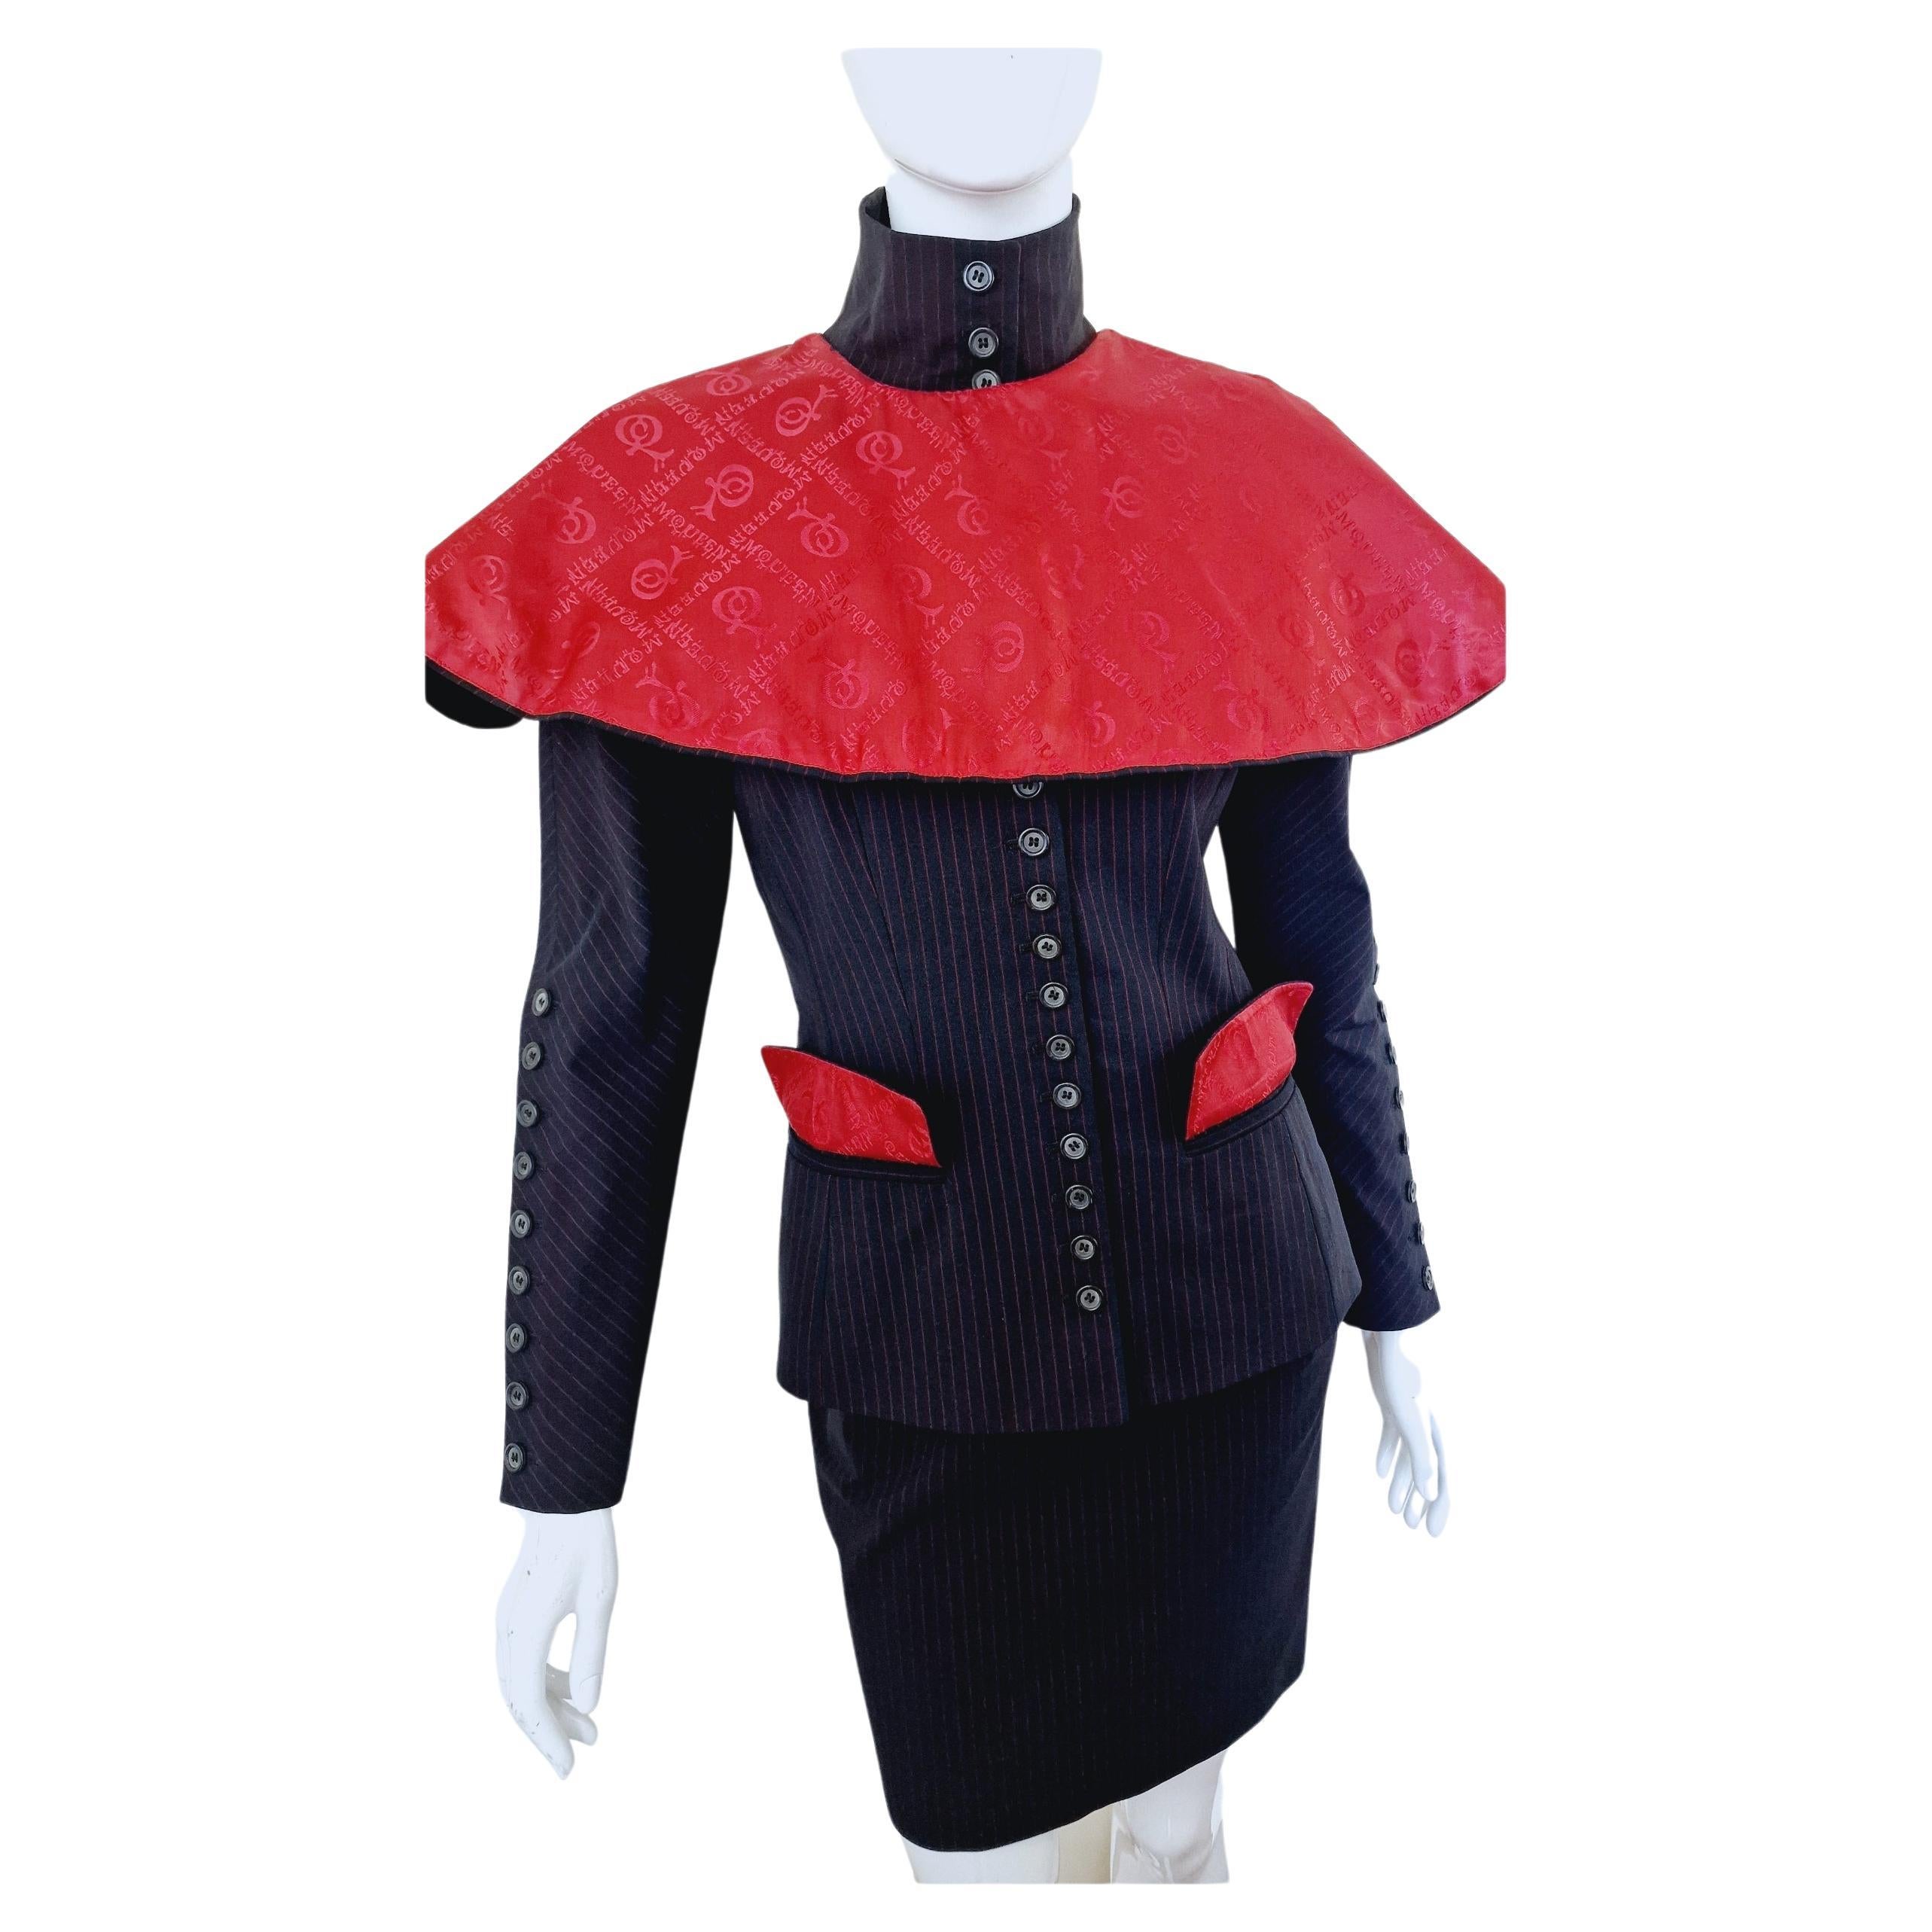 Early Alexander McQueen Joan of Arc Cape 1998 AW98 Runway Collar Dress Suit  For Sale